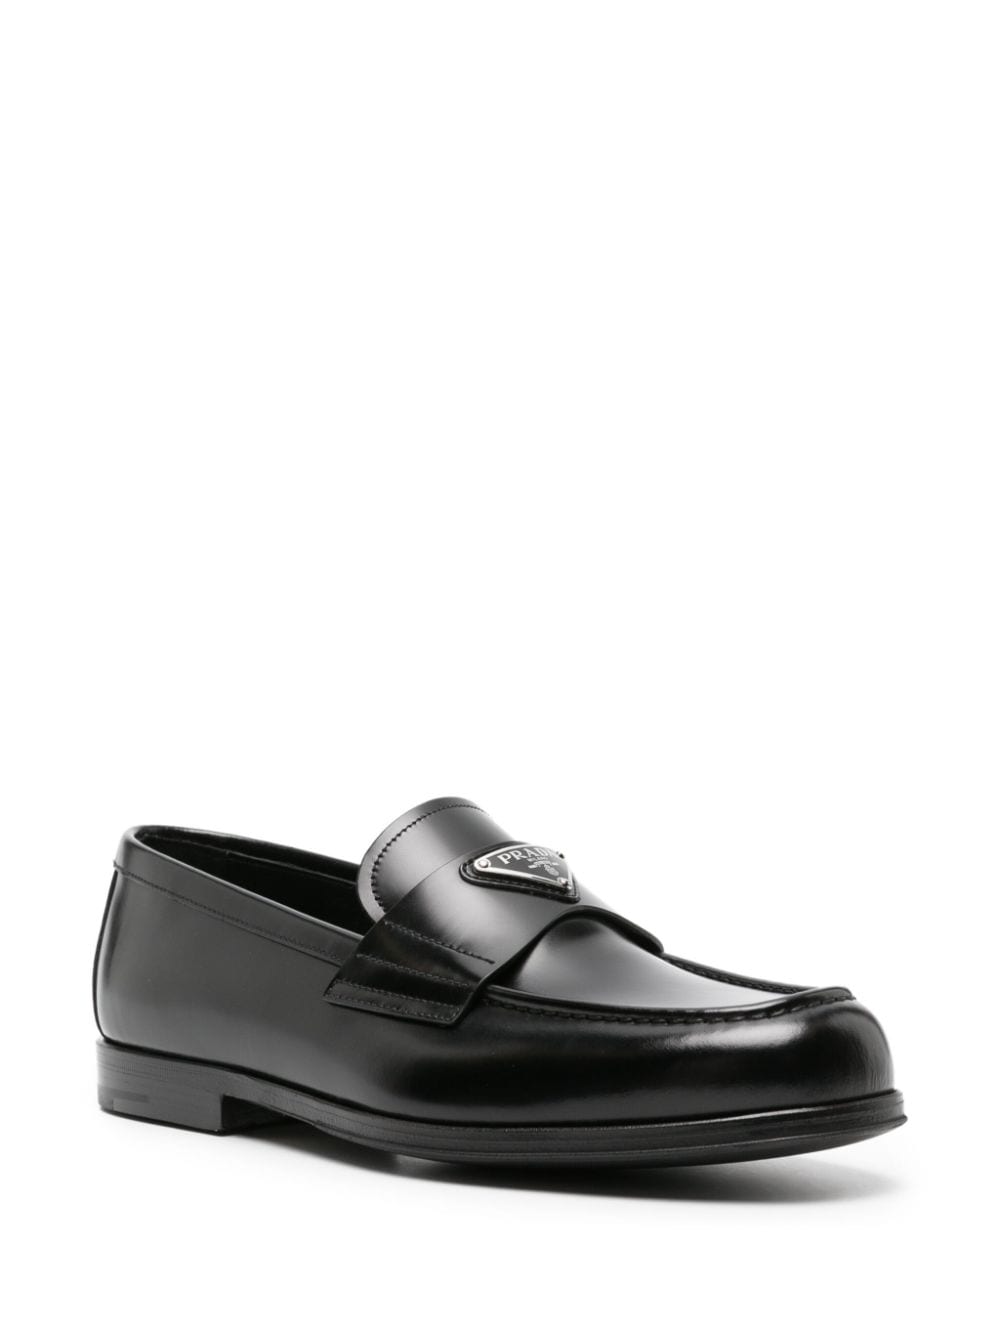 Enamel-triangle leather loafers<BR/><BR/>